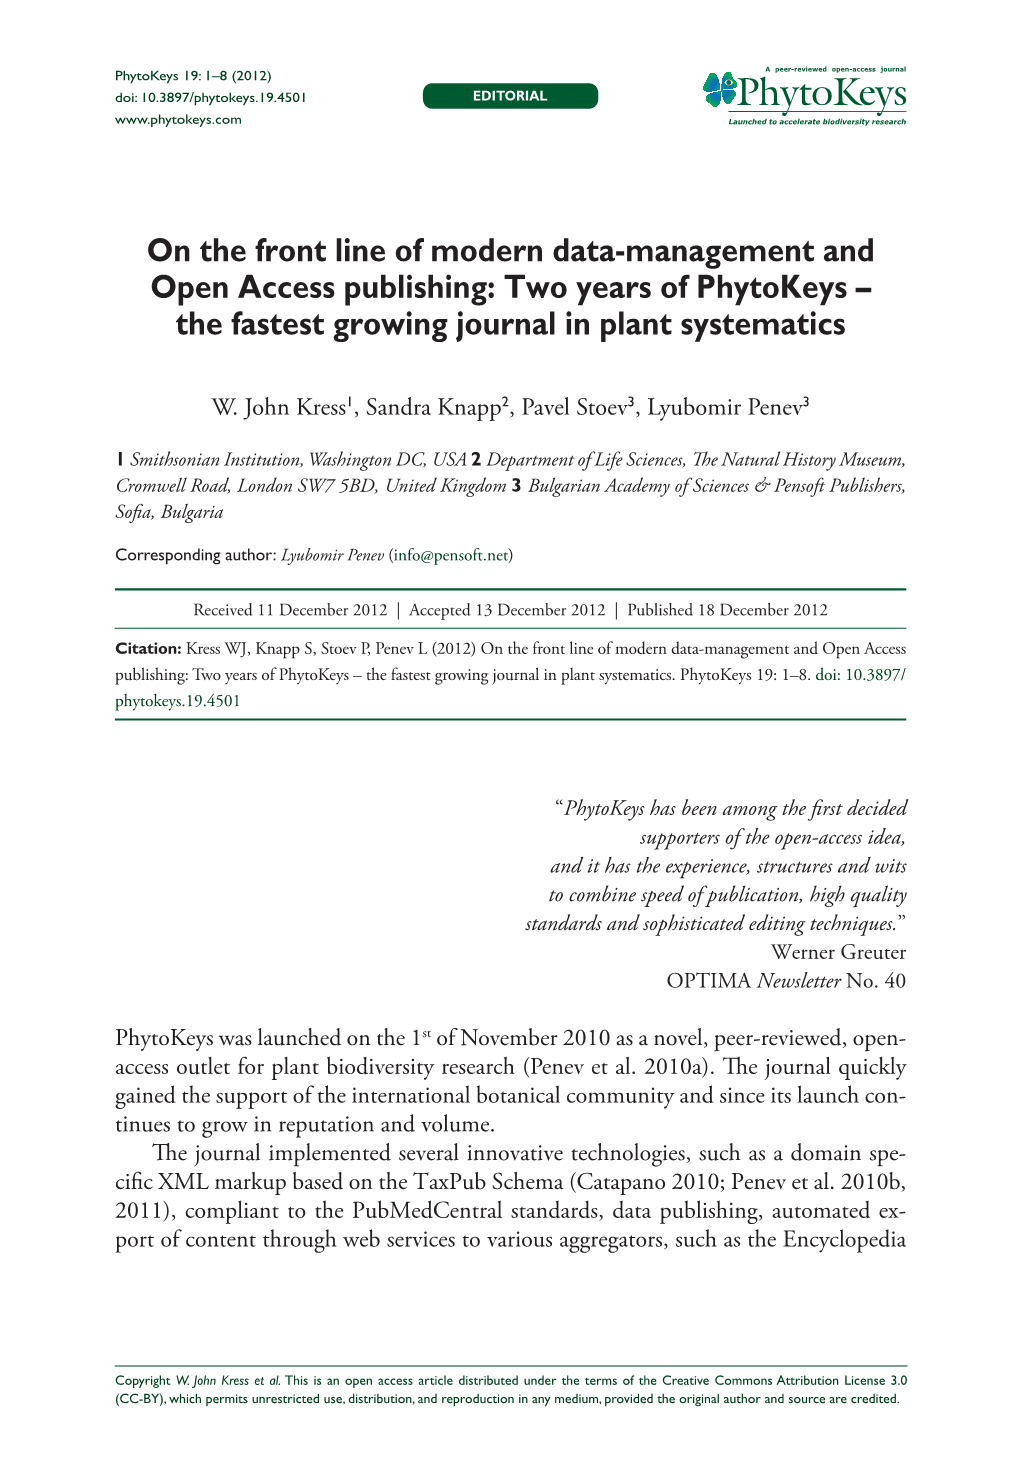 On the Front Line of Modern Data-Management and Open Access Publishing: Two Years of Phytokeys – the Fastest Growing Journal in Plant Systematics